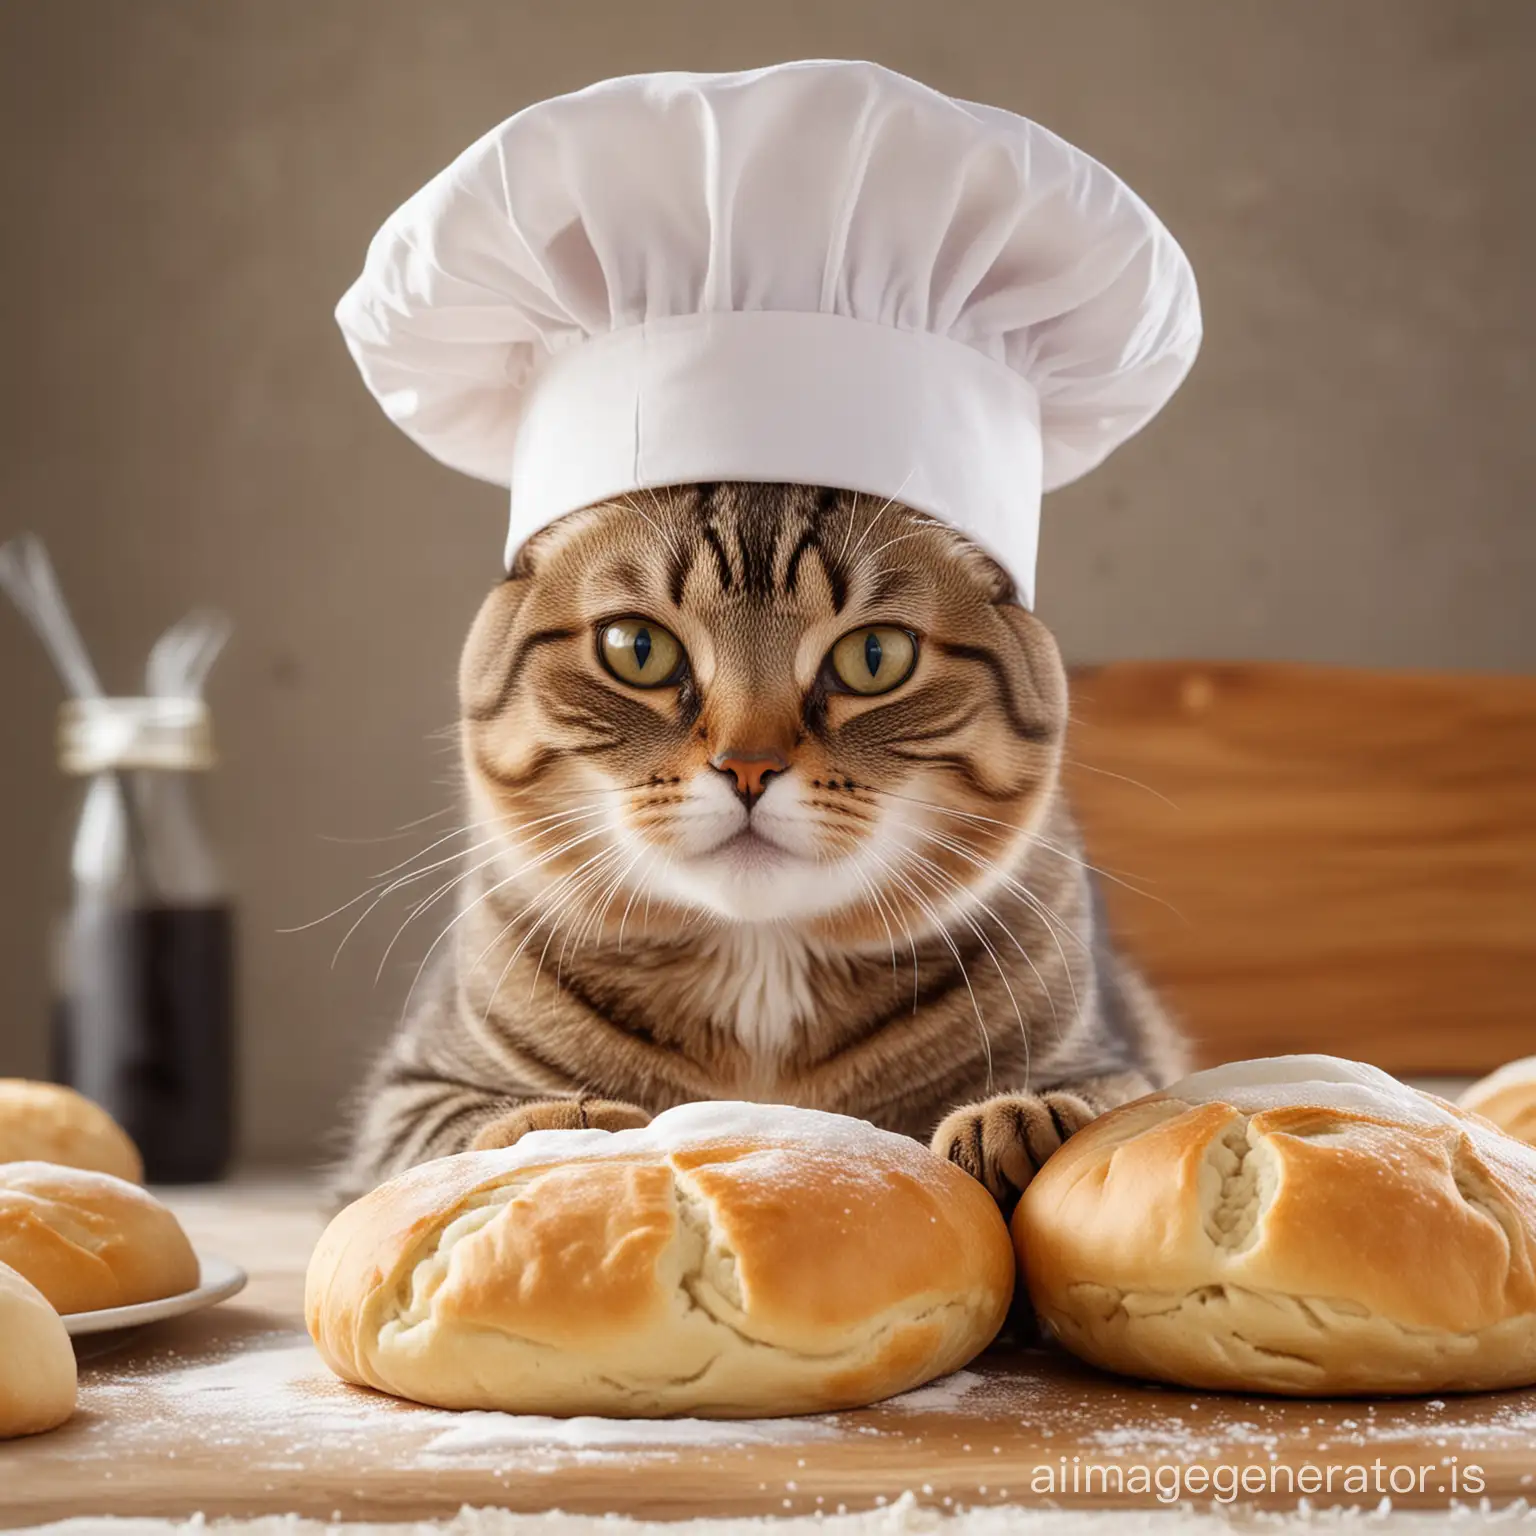 A tabby cat with big sweet eyes wearing a chef's hat kneading a dough ball